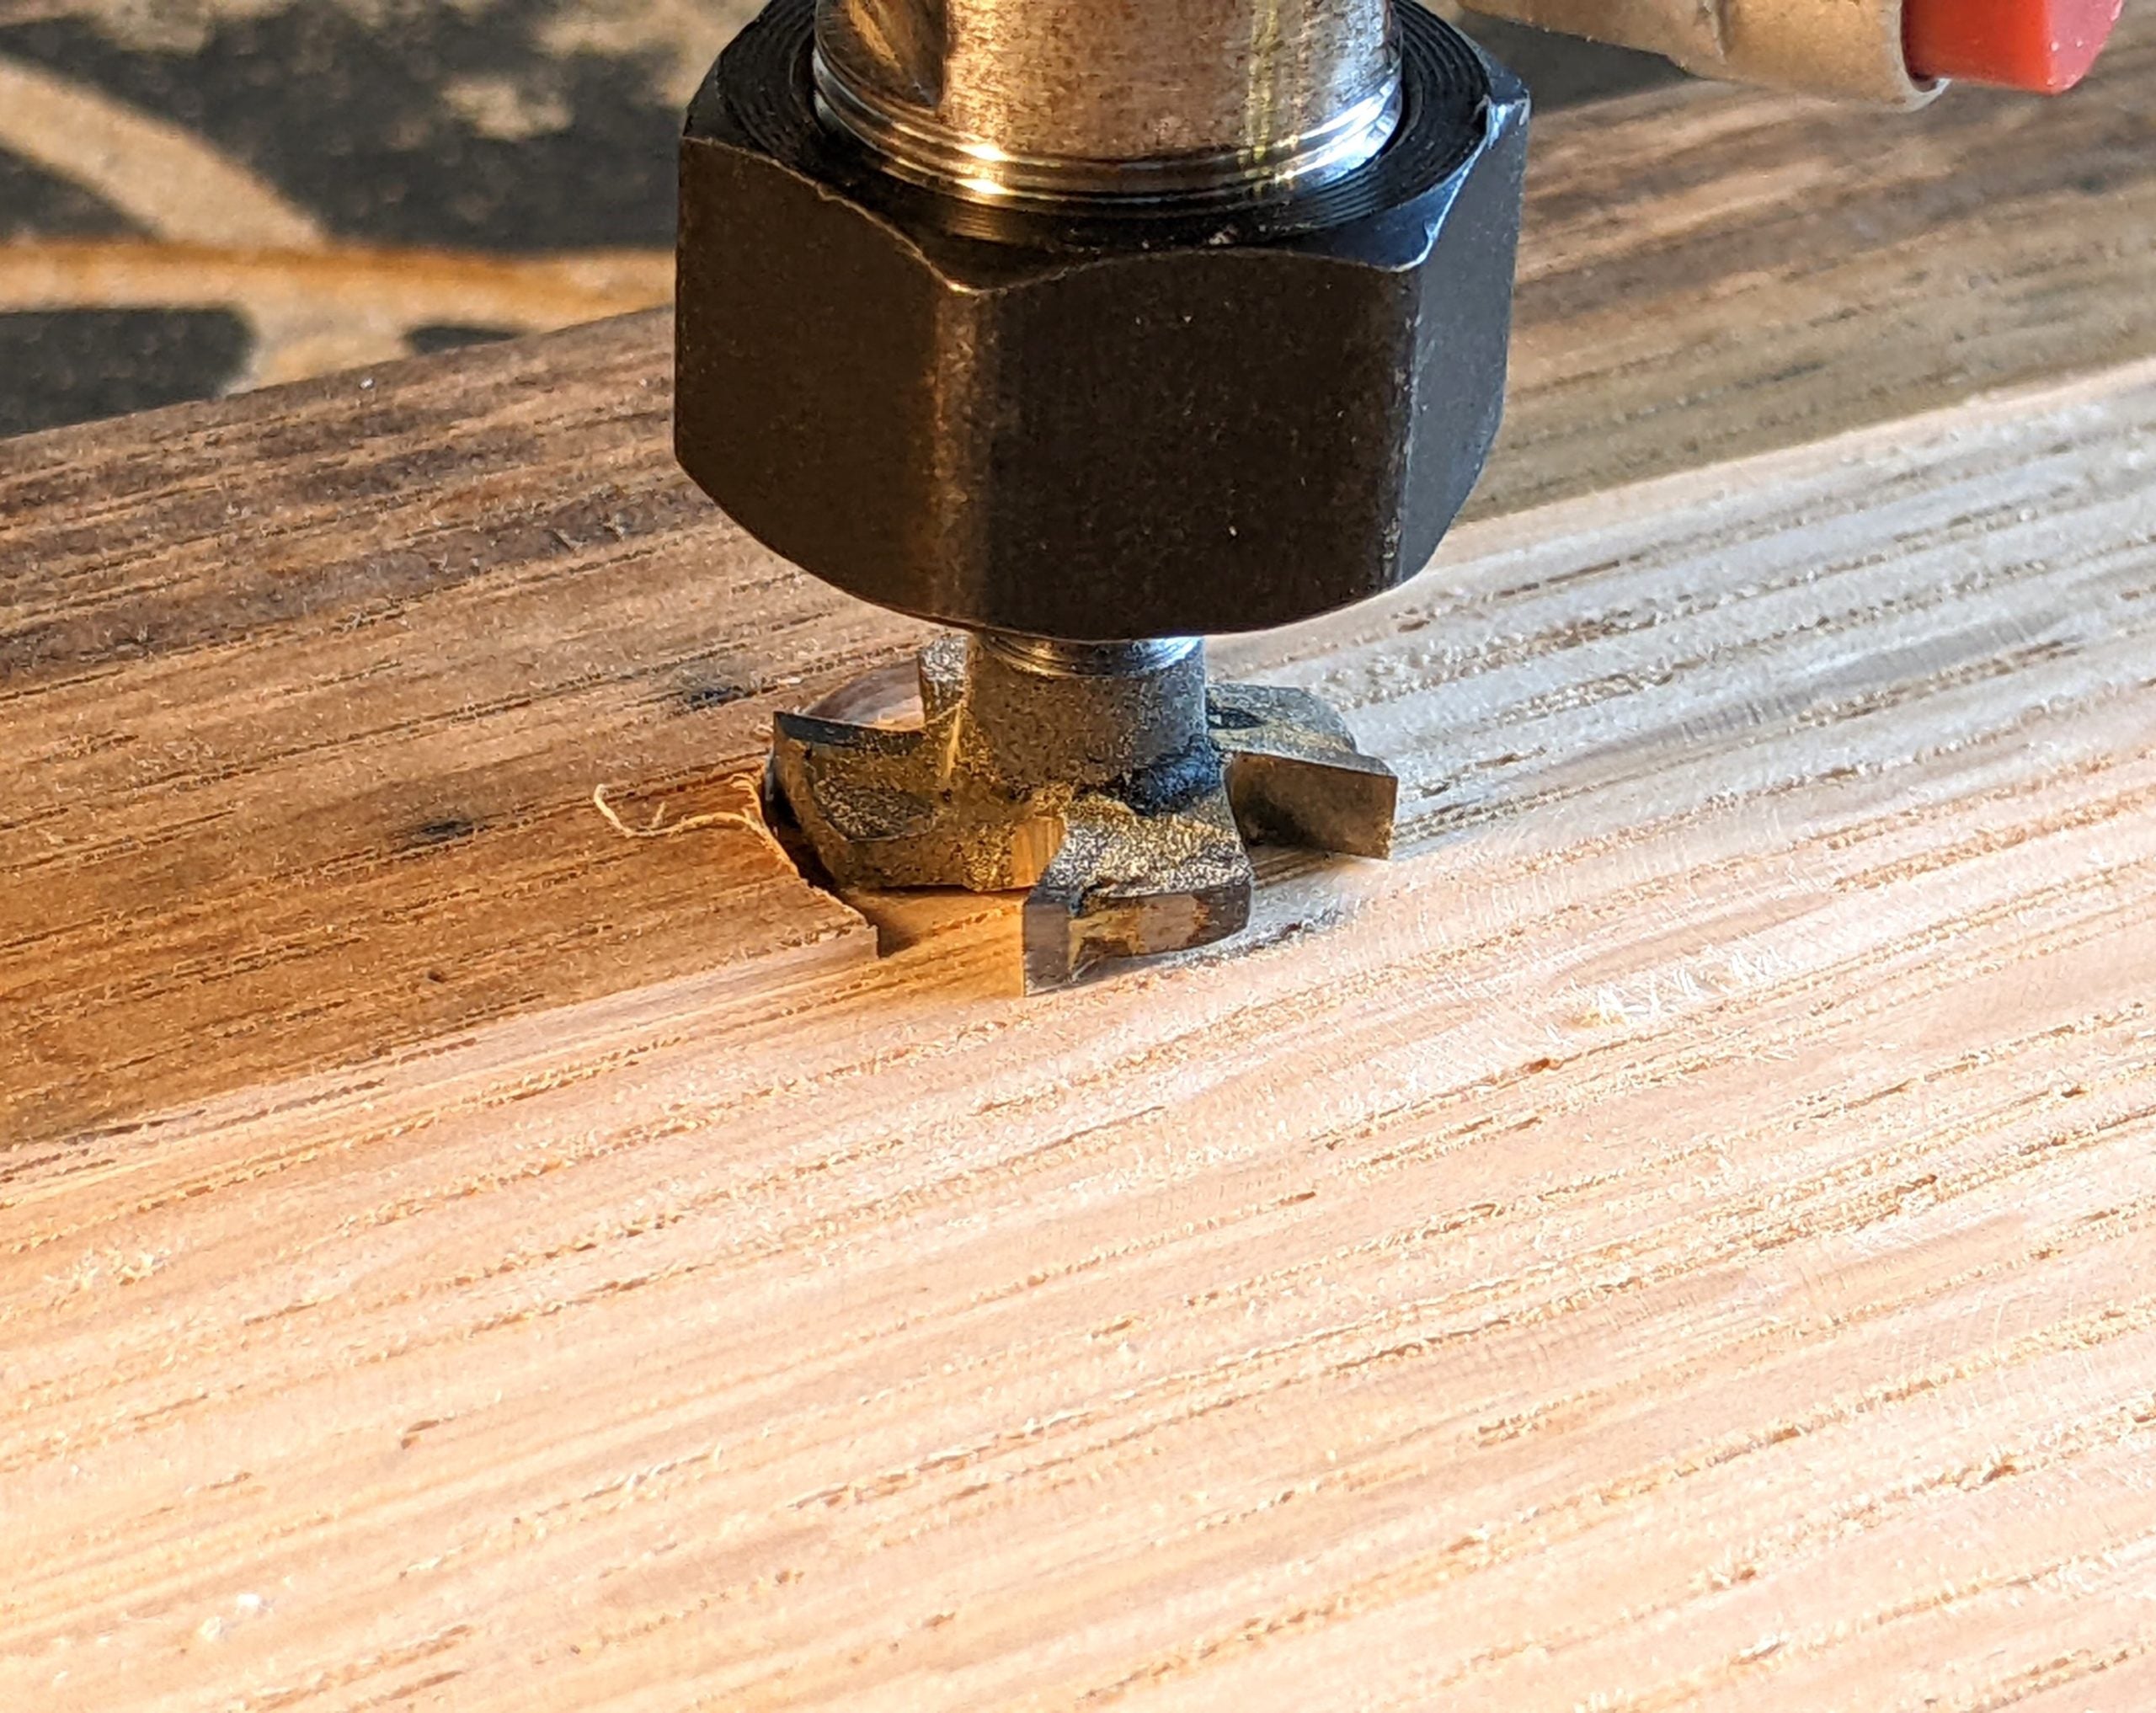 3/4" surfacing bit for spoilboards and slab flattening on the 3018 pro